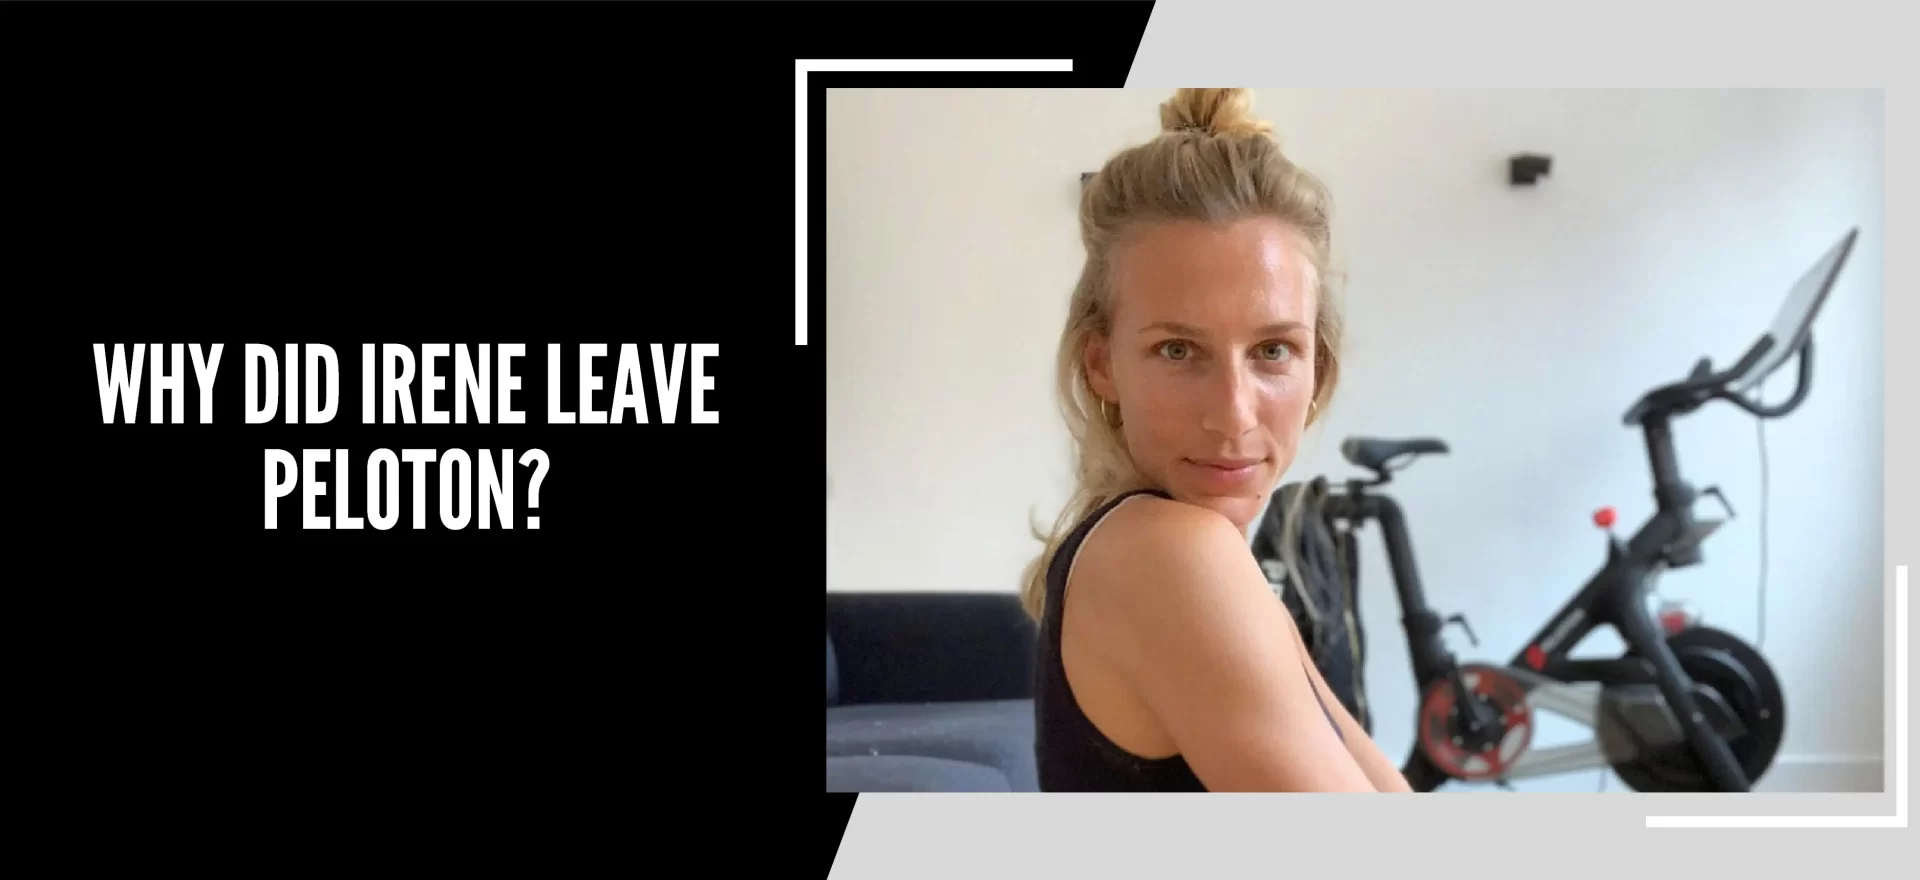 Why Did Irene Leave Peloton?